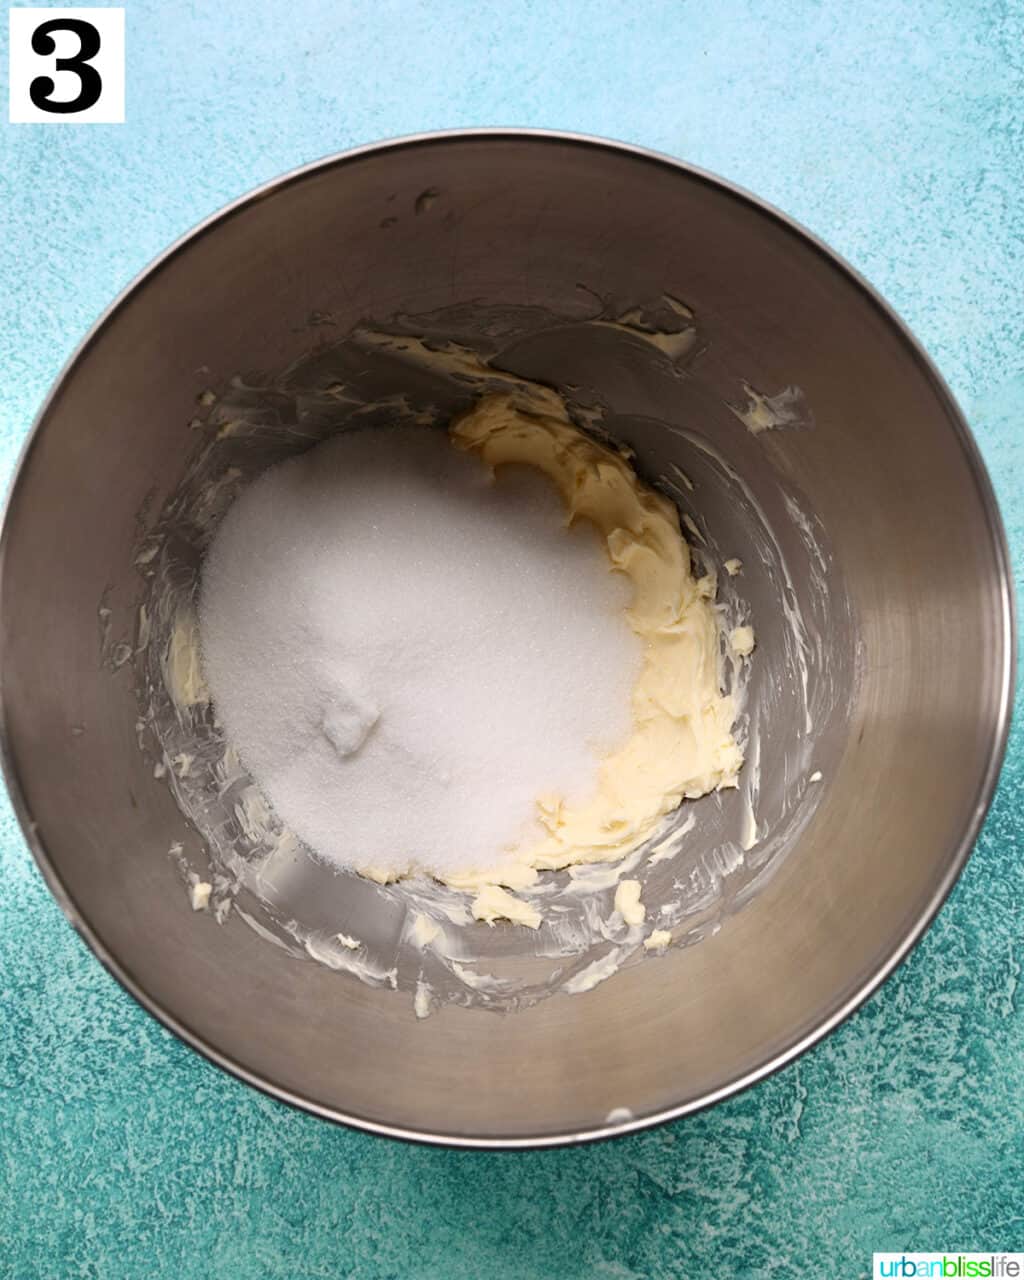 butter and sugar in a stainless steel bowl.